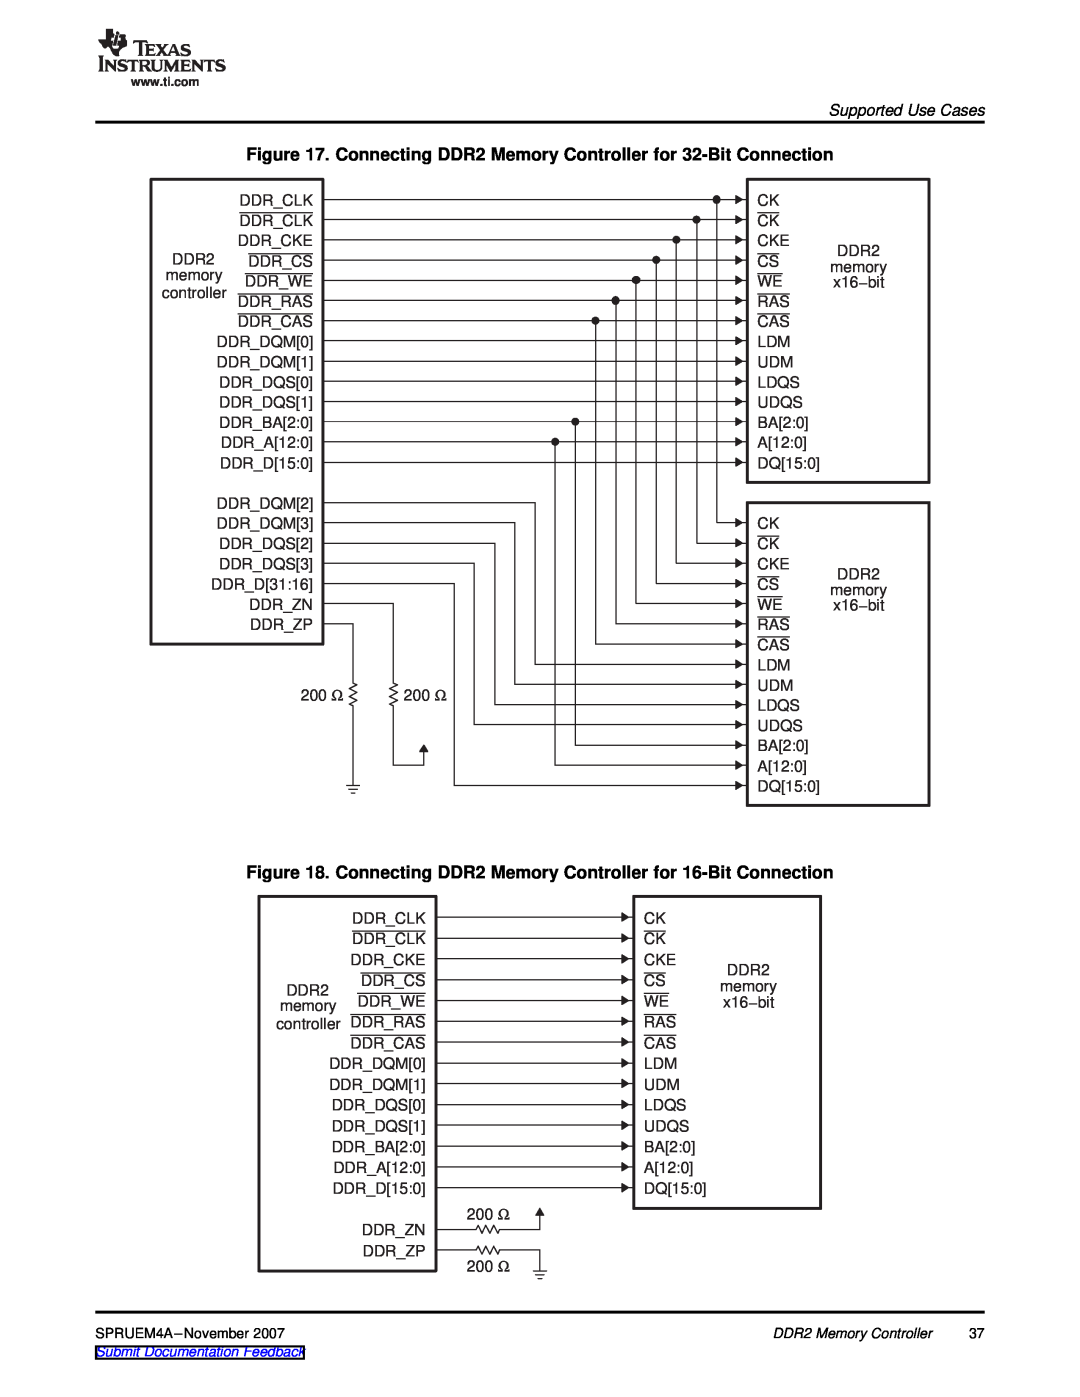 Texas Instruments TMS320C642x DSP manual Connecting DDR2 Memory Controller for 32-Bit Connection, Supported Use Cases 